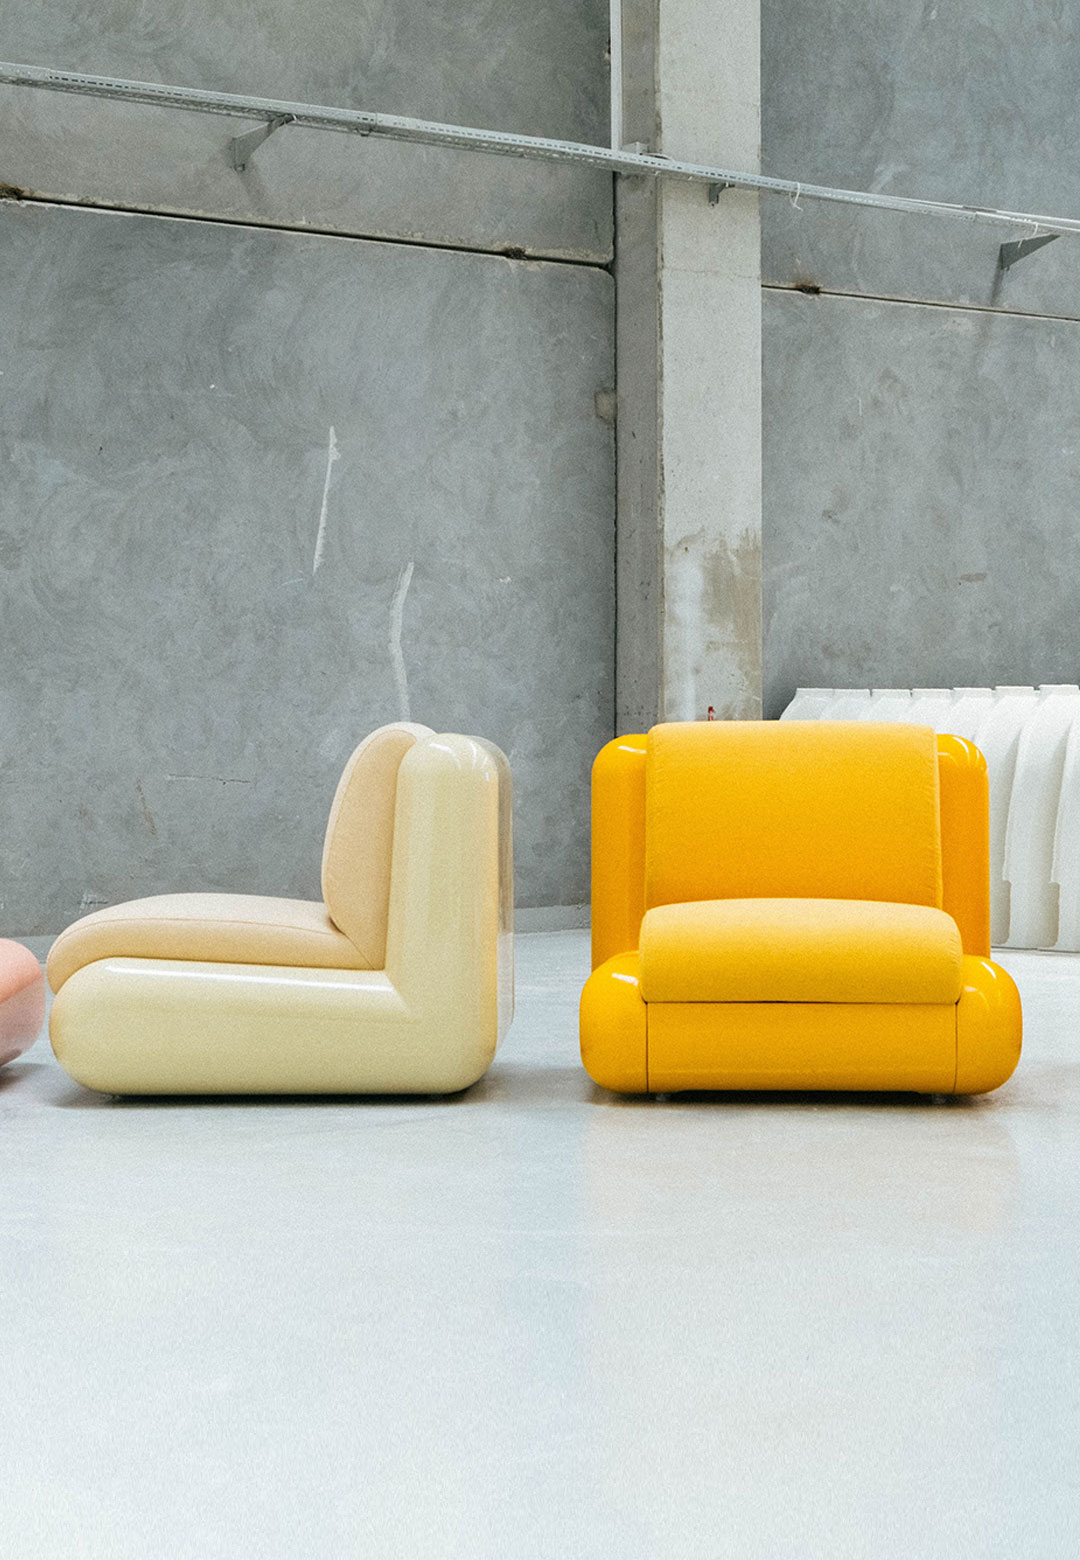 T4 furniture collection by Holloway Li is a nostalgic ode to the 90s optimism